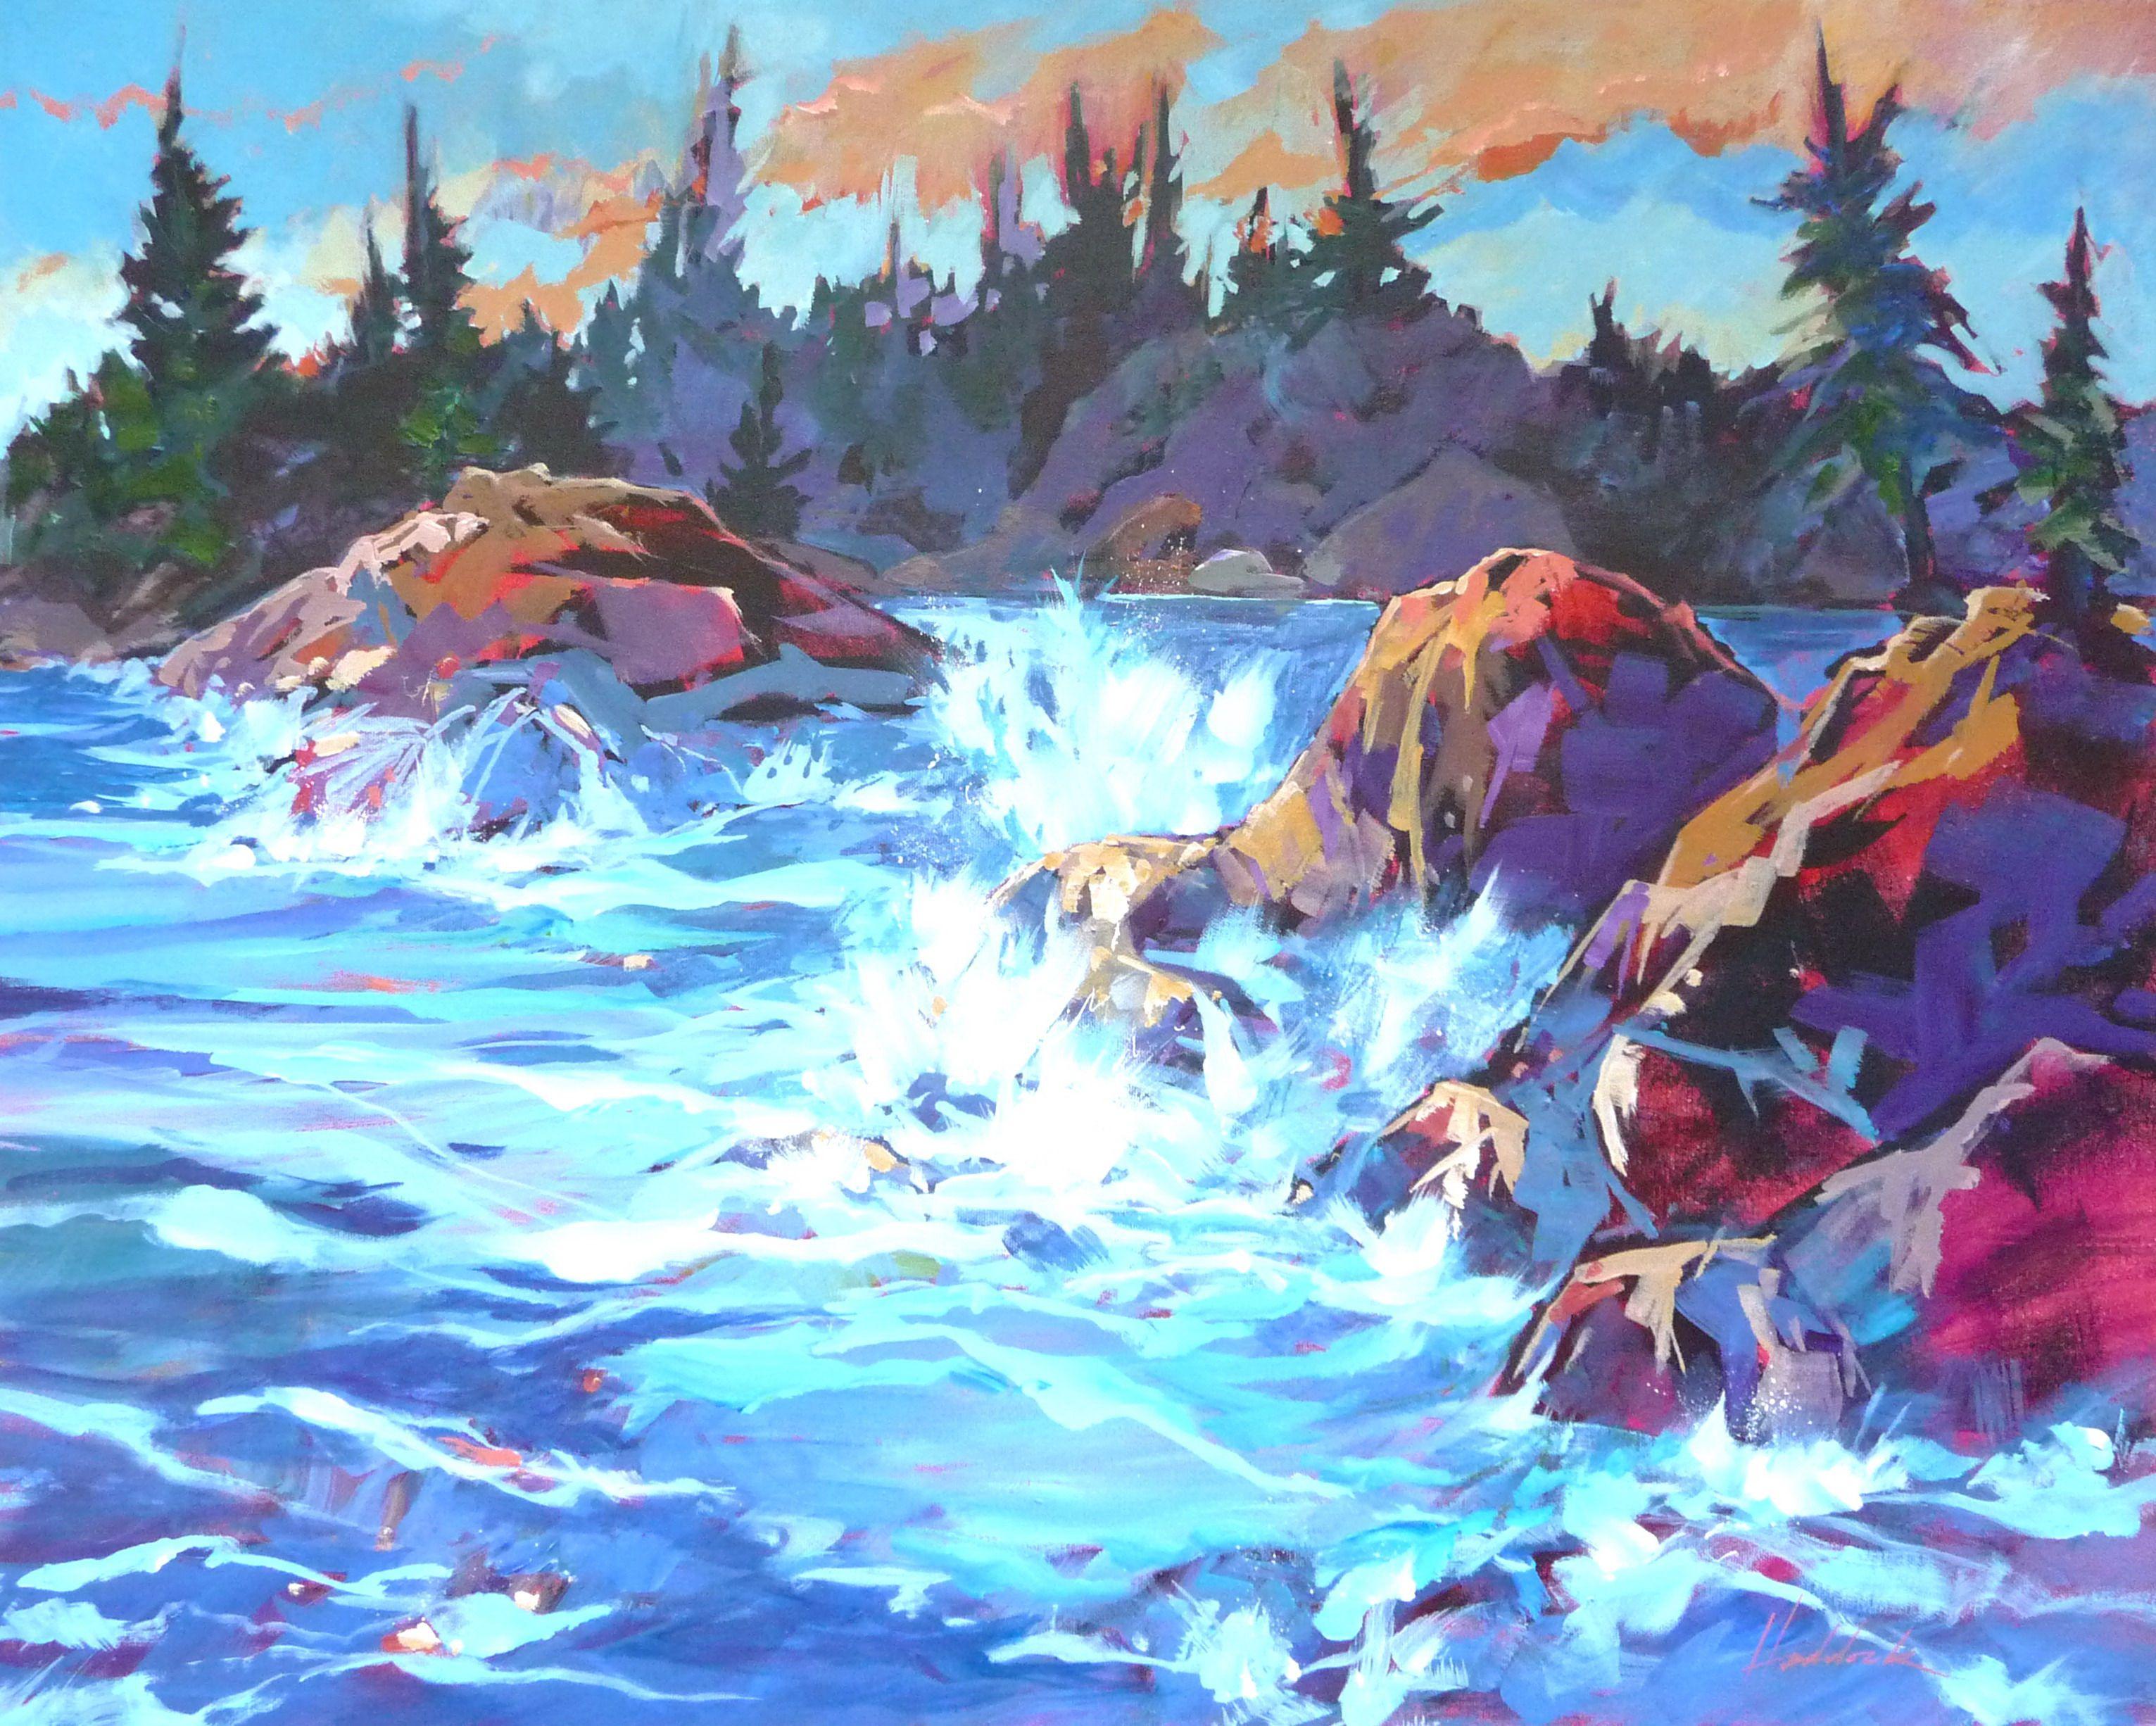  This is a scene from Ucluelet, on Vancouver Island's rugged west coast. Late sun strikes the rocks and highlights the crashing waves. :: Painting :: Impressionist :: This piece comes with an official certificate of authenticity signed by the artist